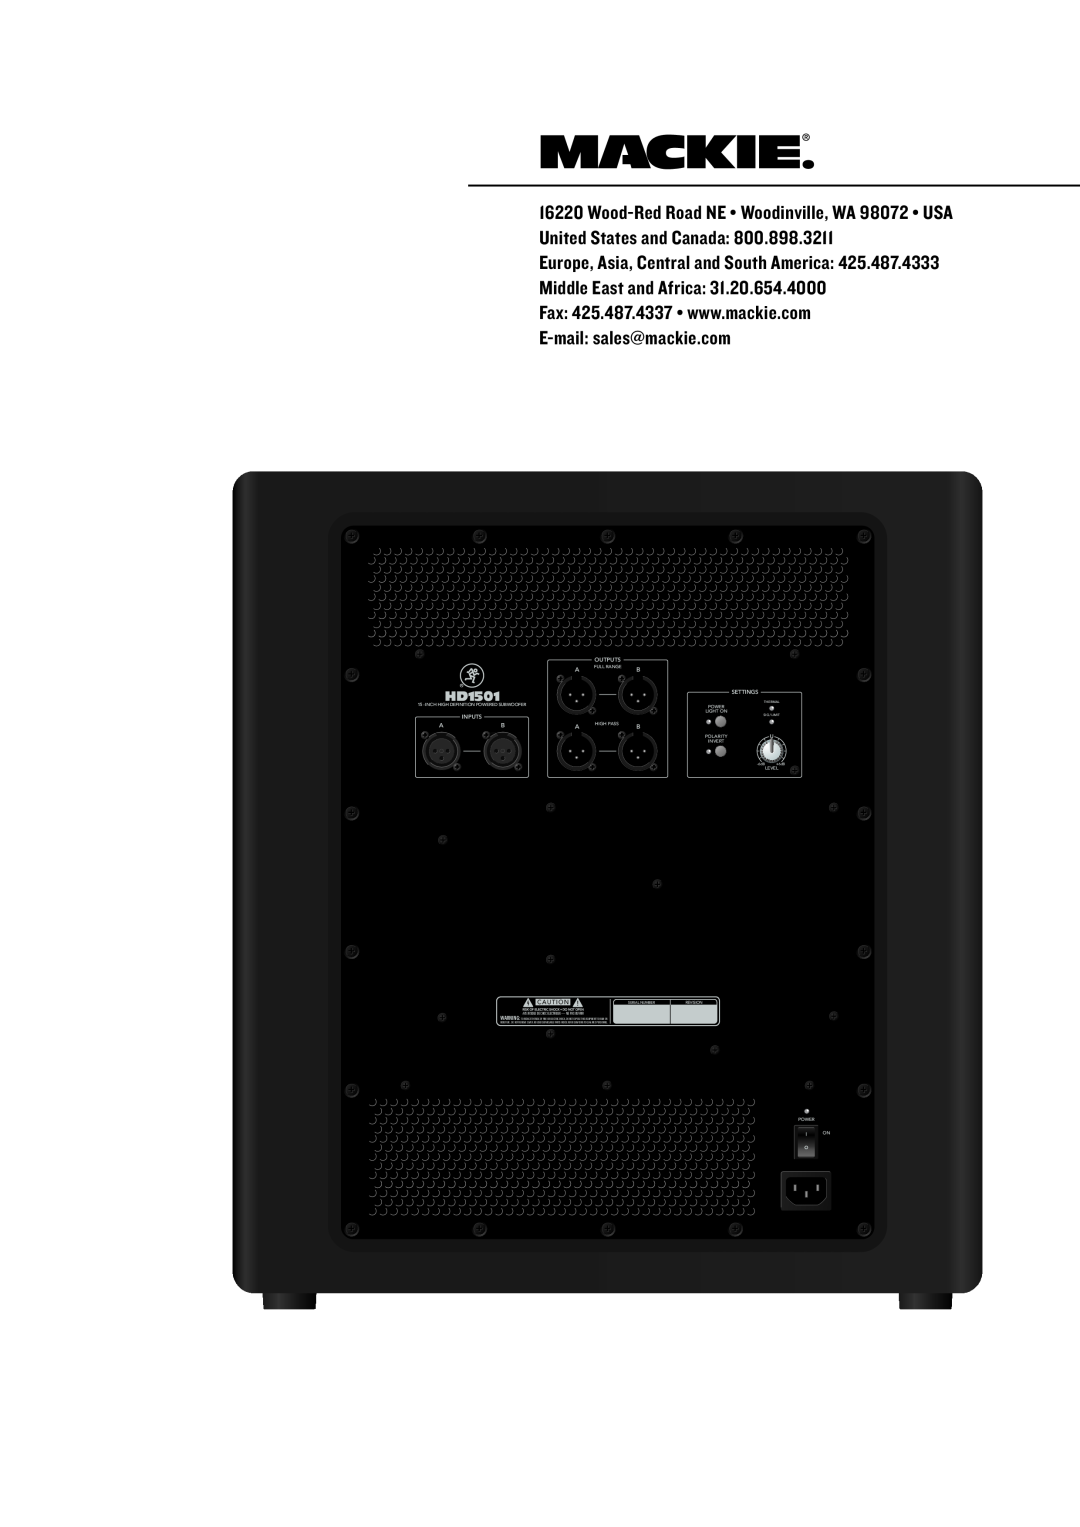 Mackie HD1501 manual Europe, Asia, Central and South America, Middle East and Africa, Outputs, Settings, Inputs 